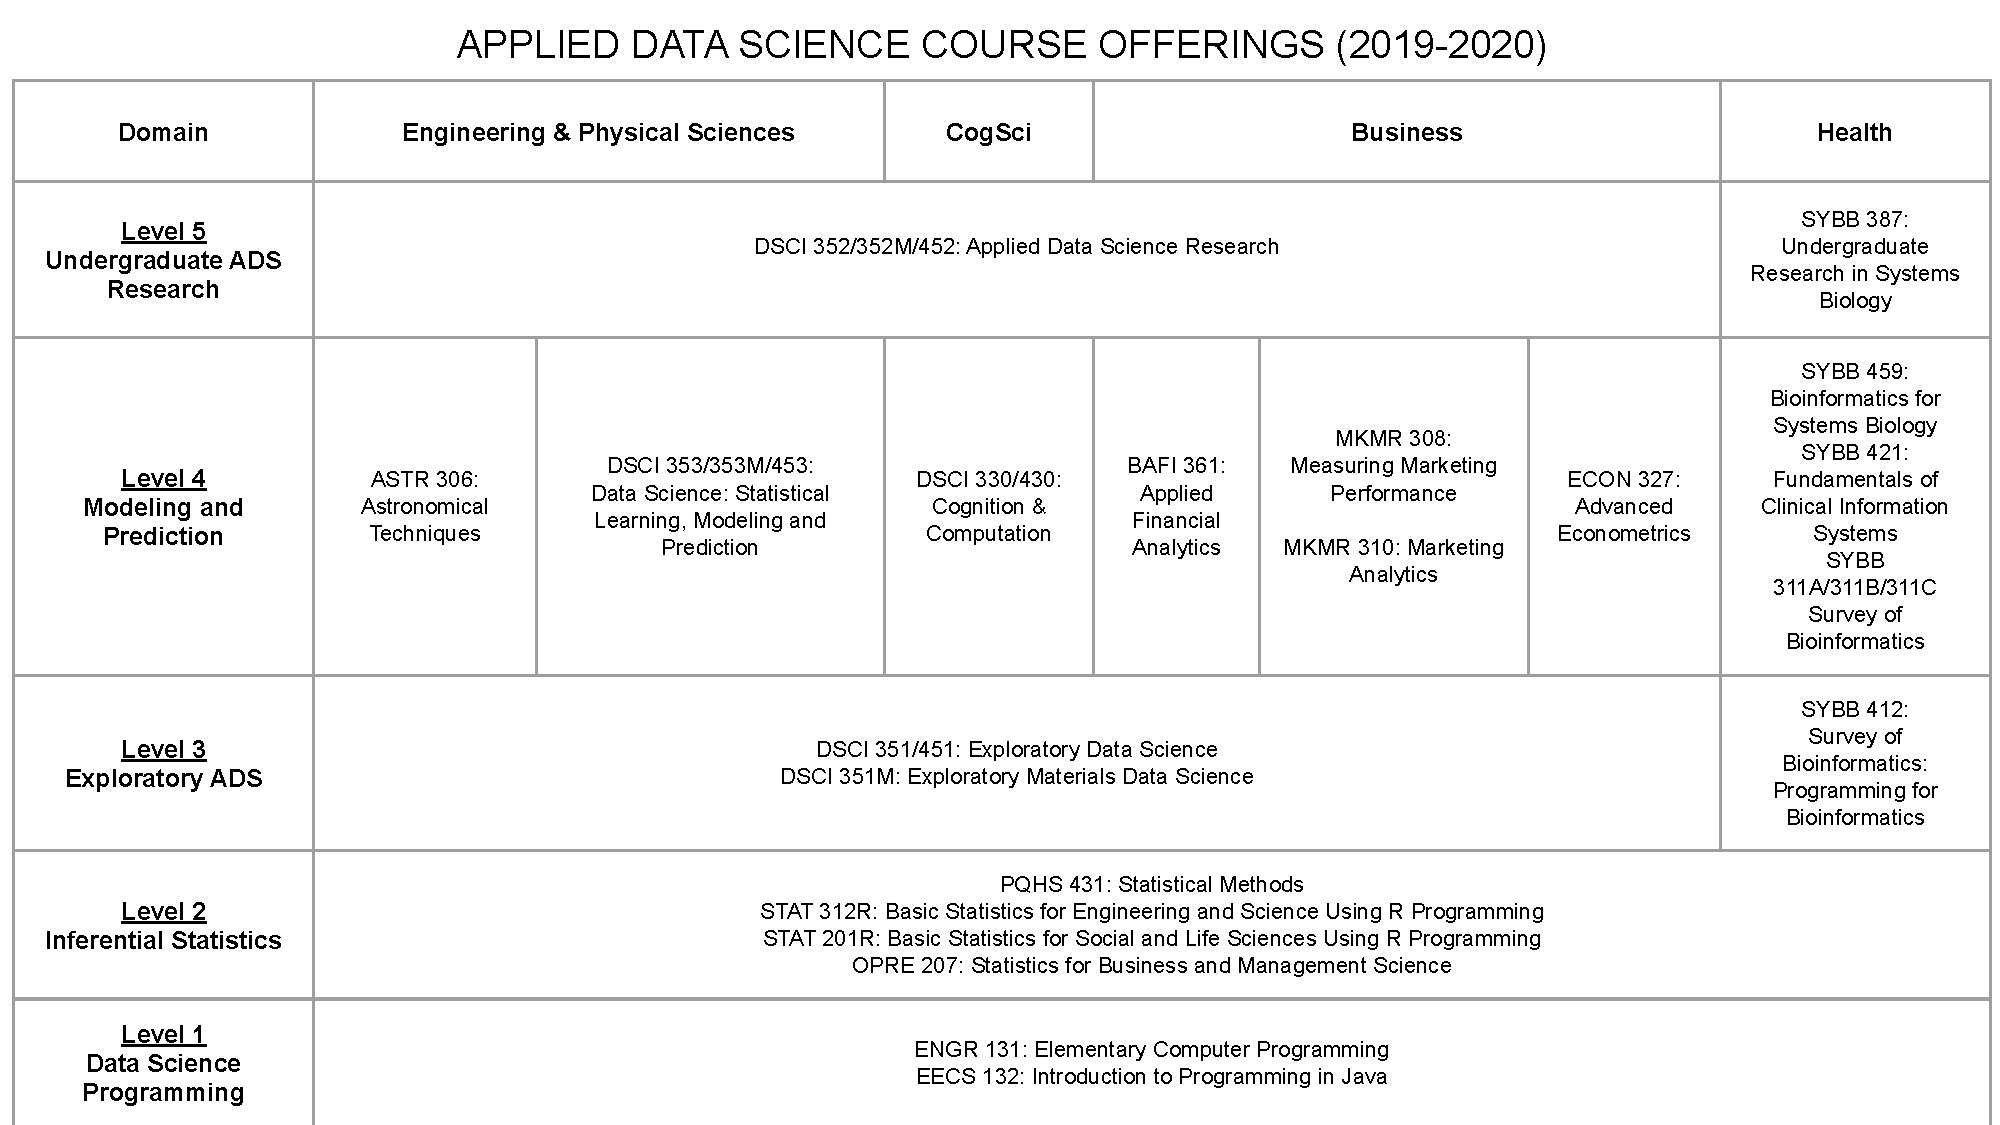 APPLIED DATA SCIENCE COURSE OFFERINGS (2019-2020)